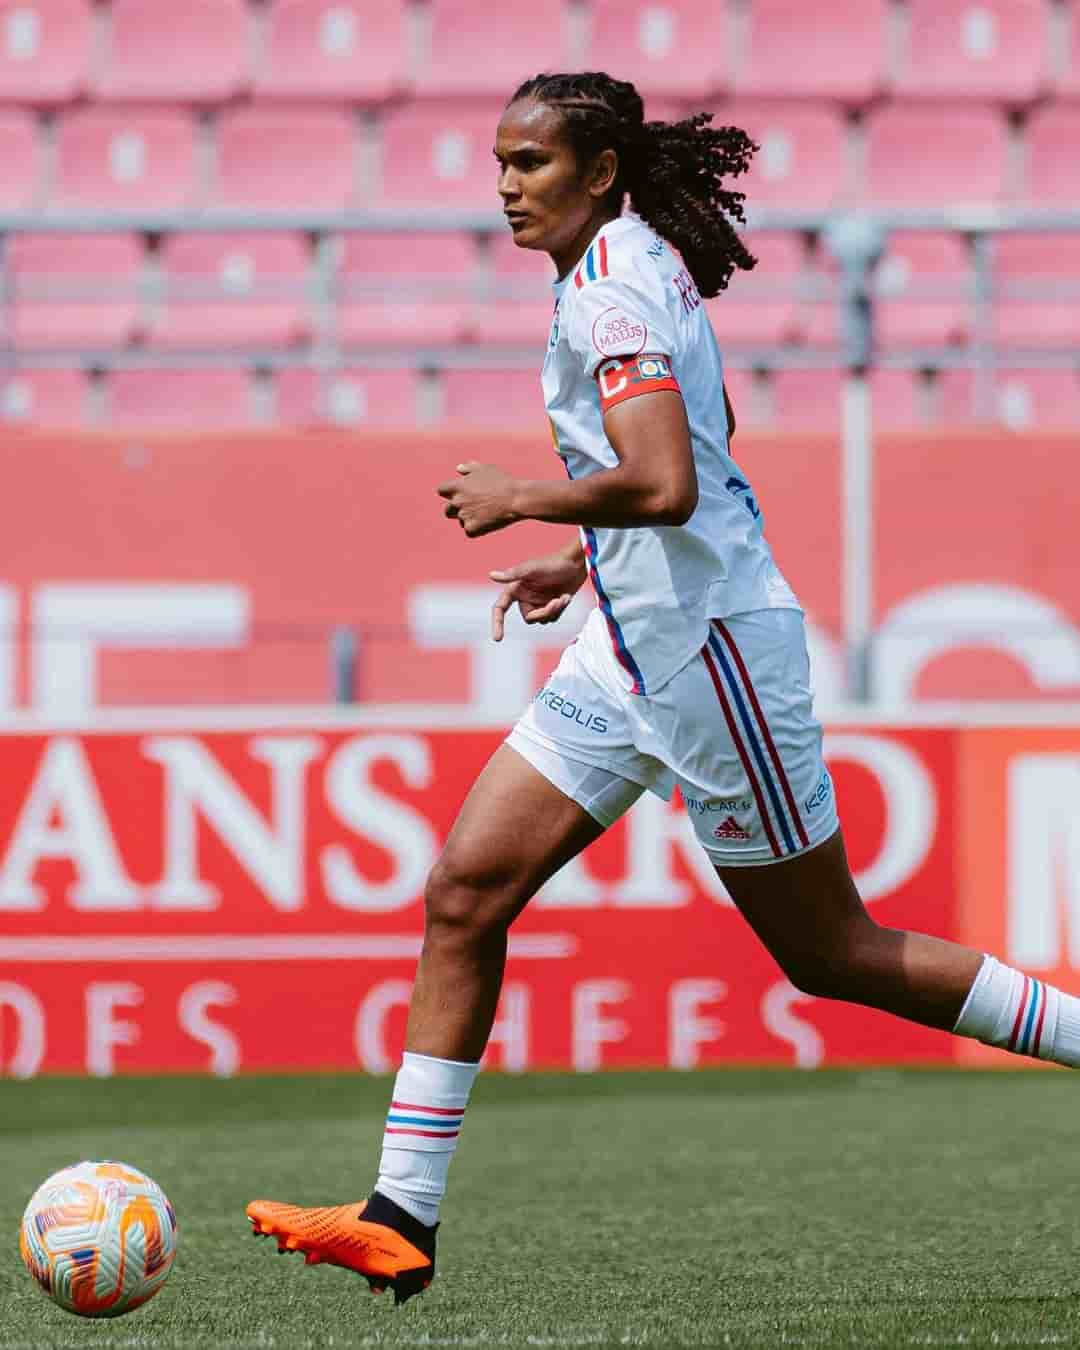 10 Incredible Female Black Soccer Players You Should Know